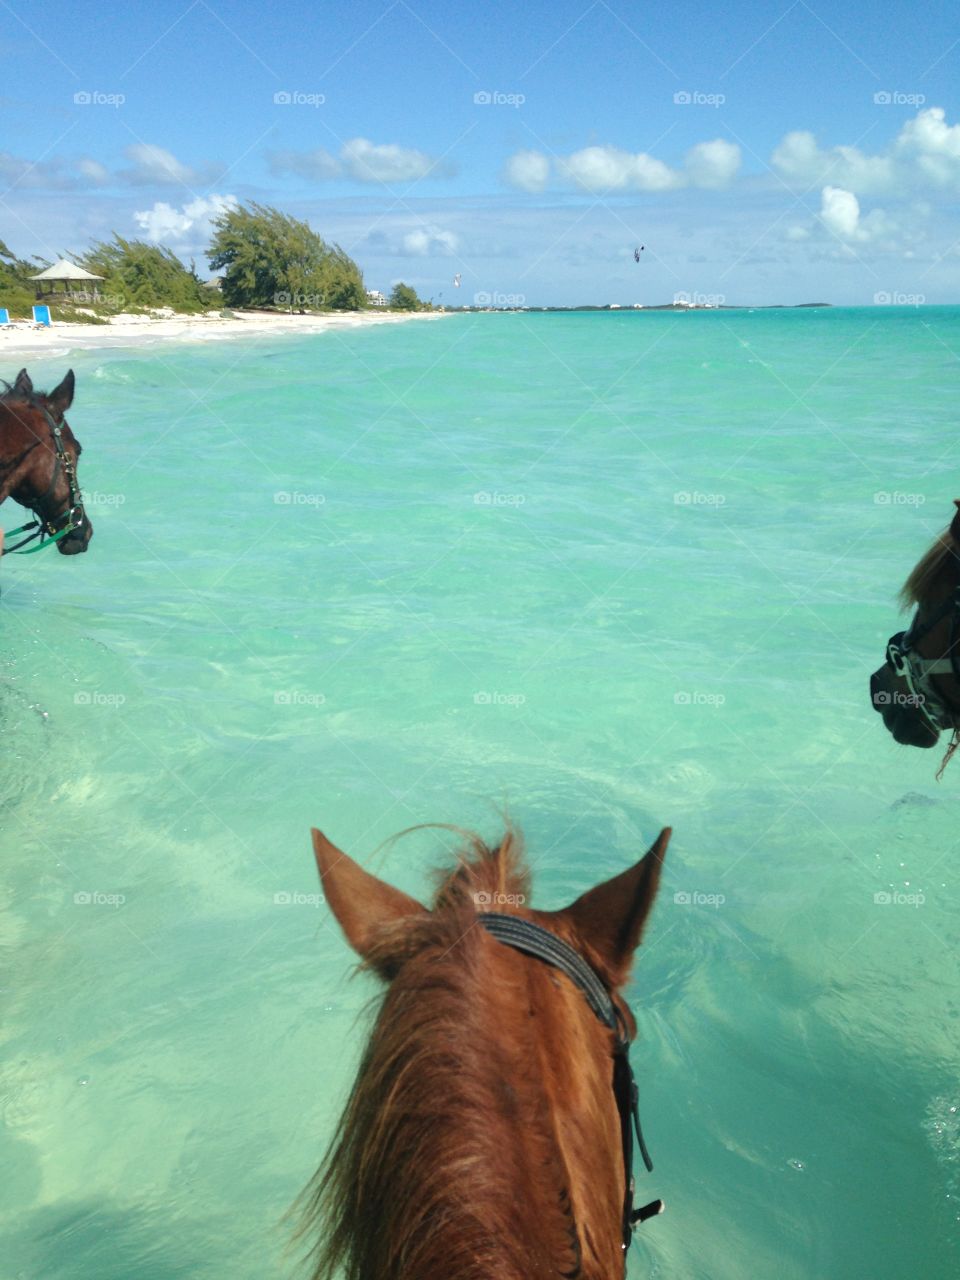 Horseback Riding in Turks and Caicos